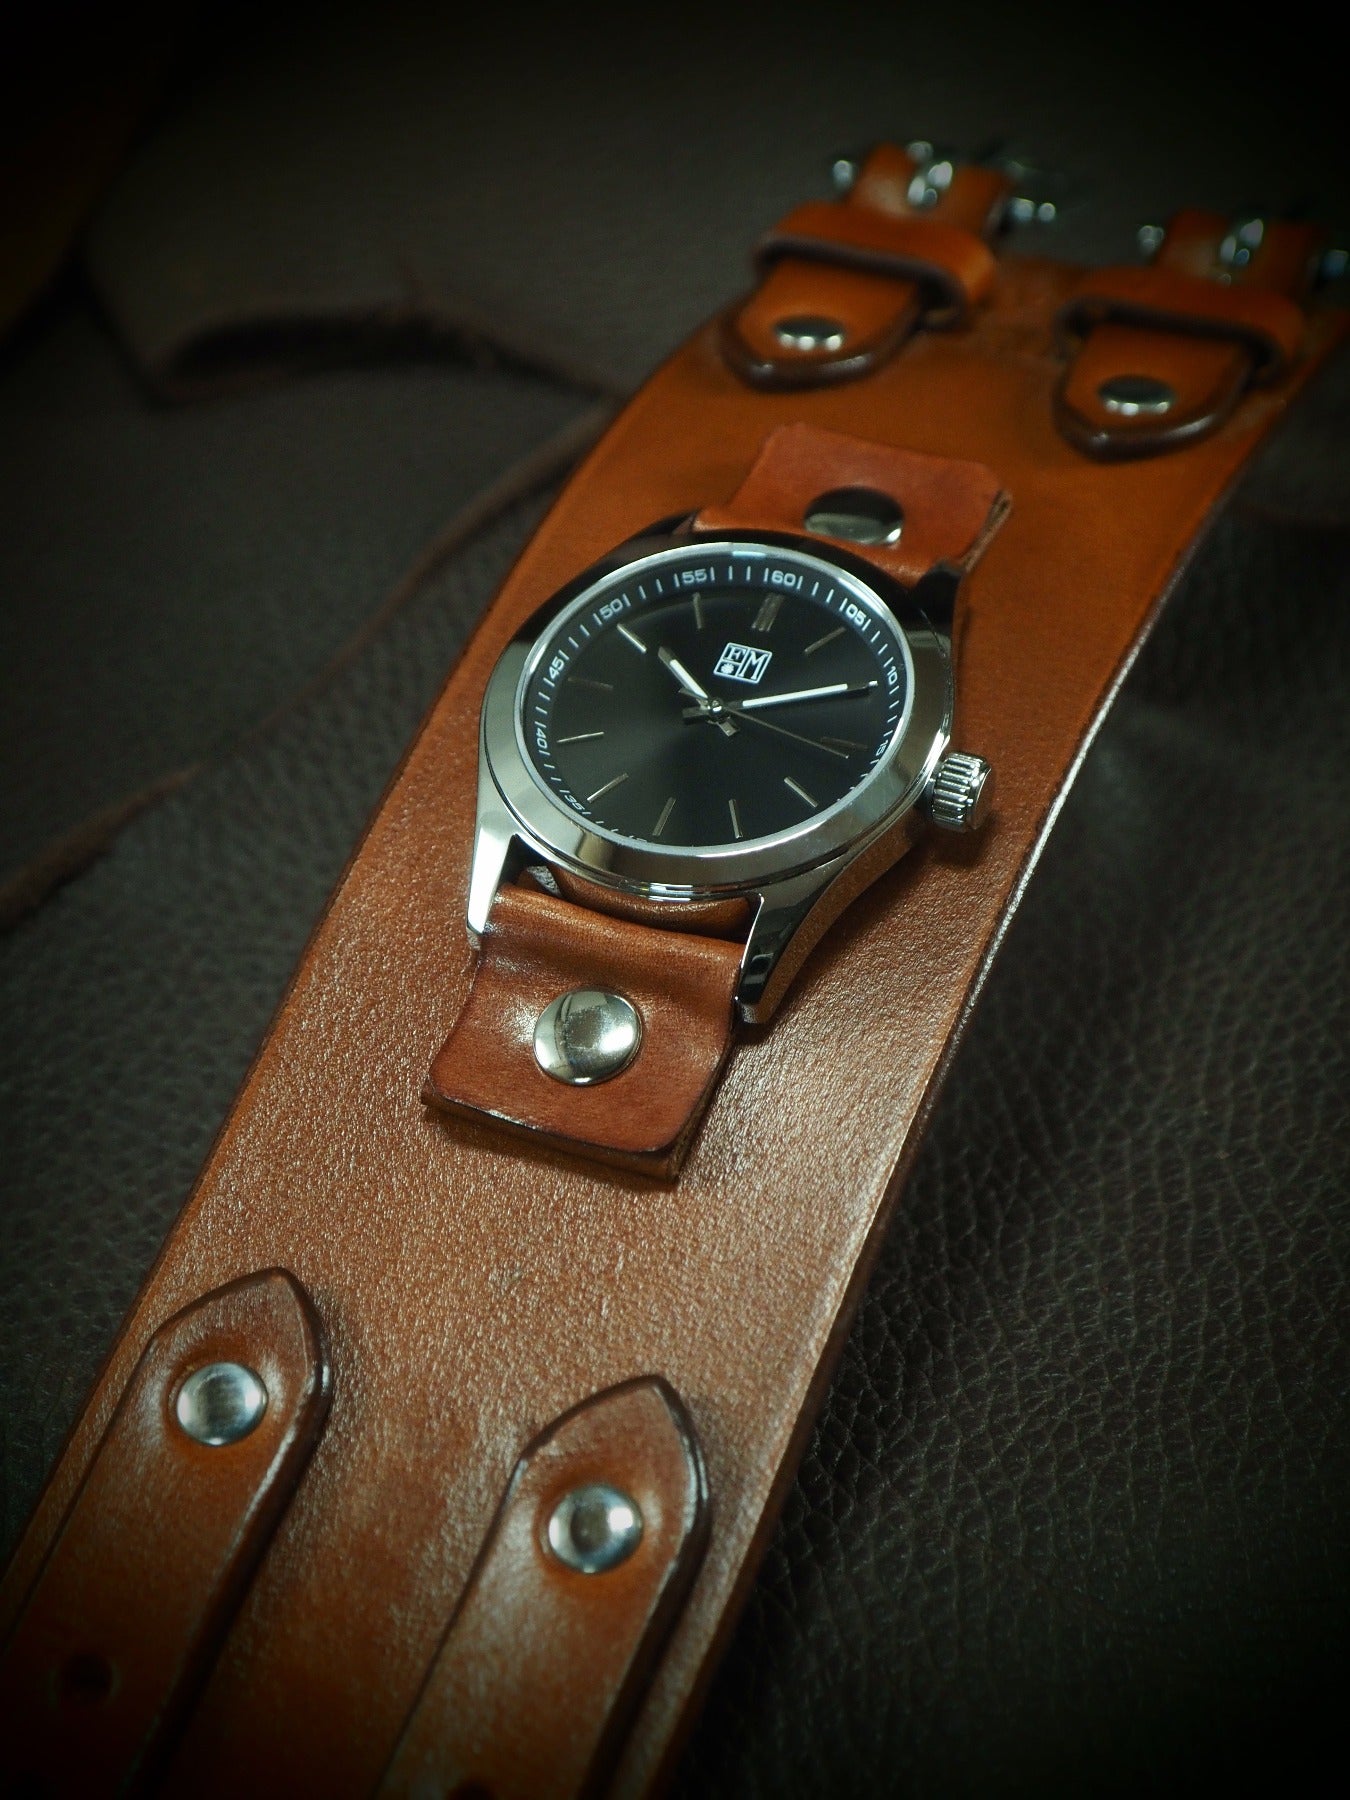 Rich Tan Leather cuff watch : Refined Retro Vintage style